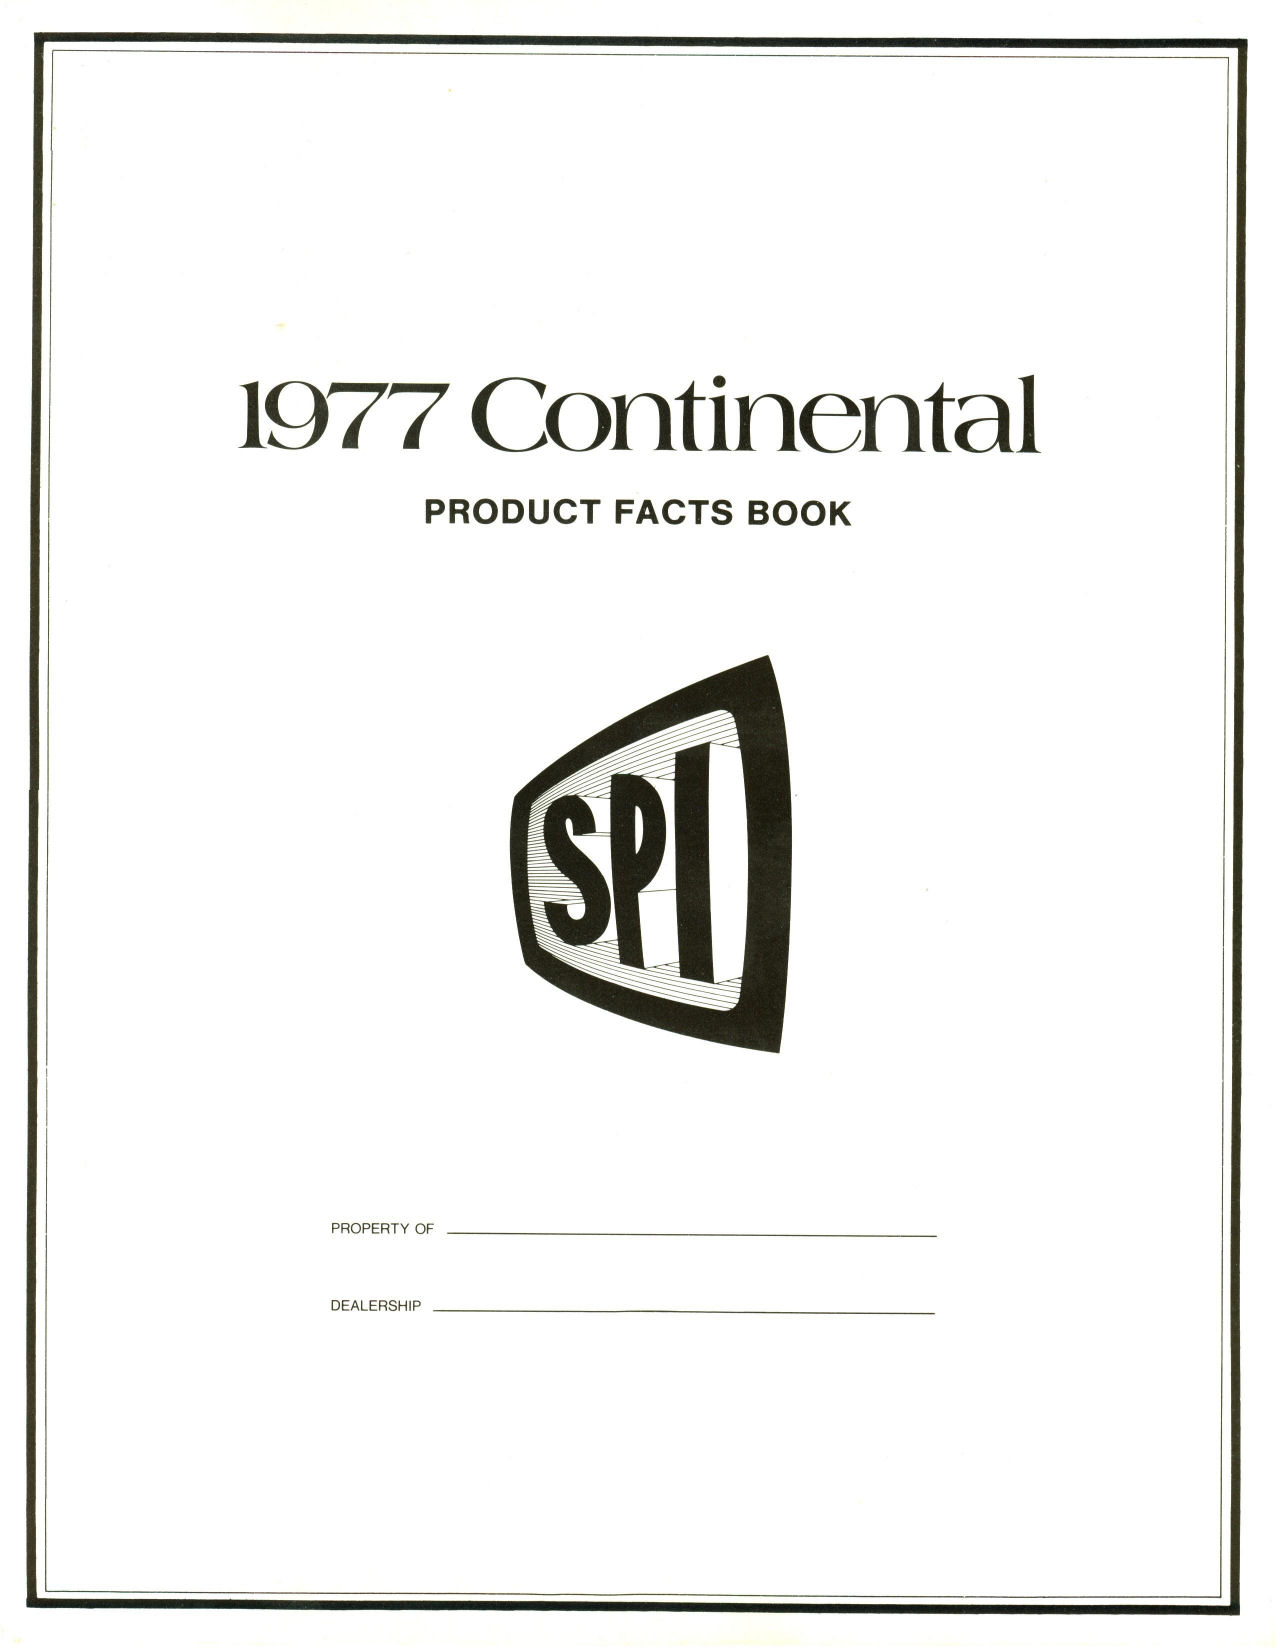 1977 Continental Product Facts Book-0-01